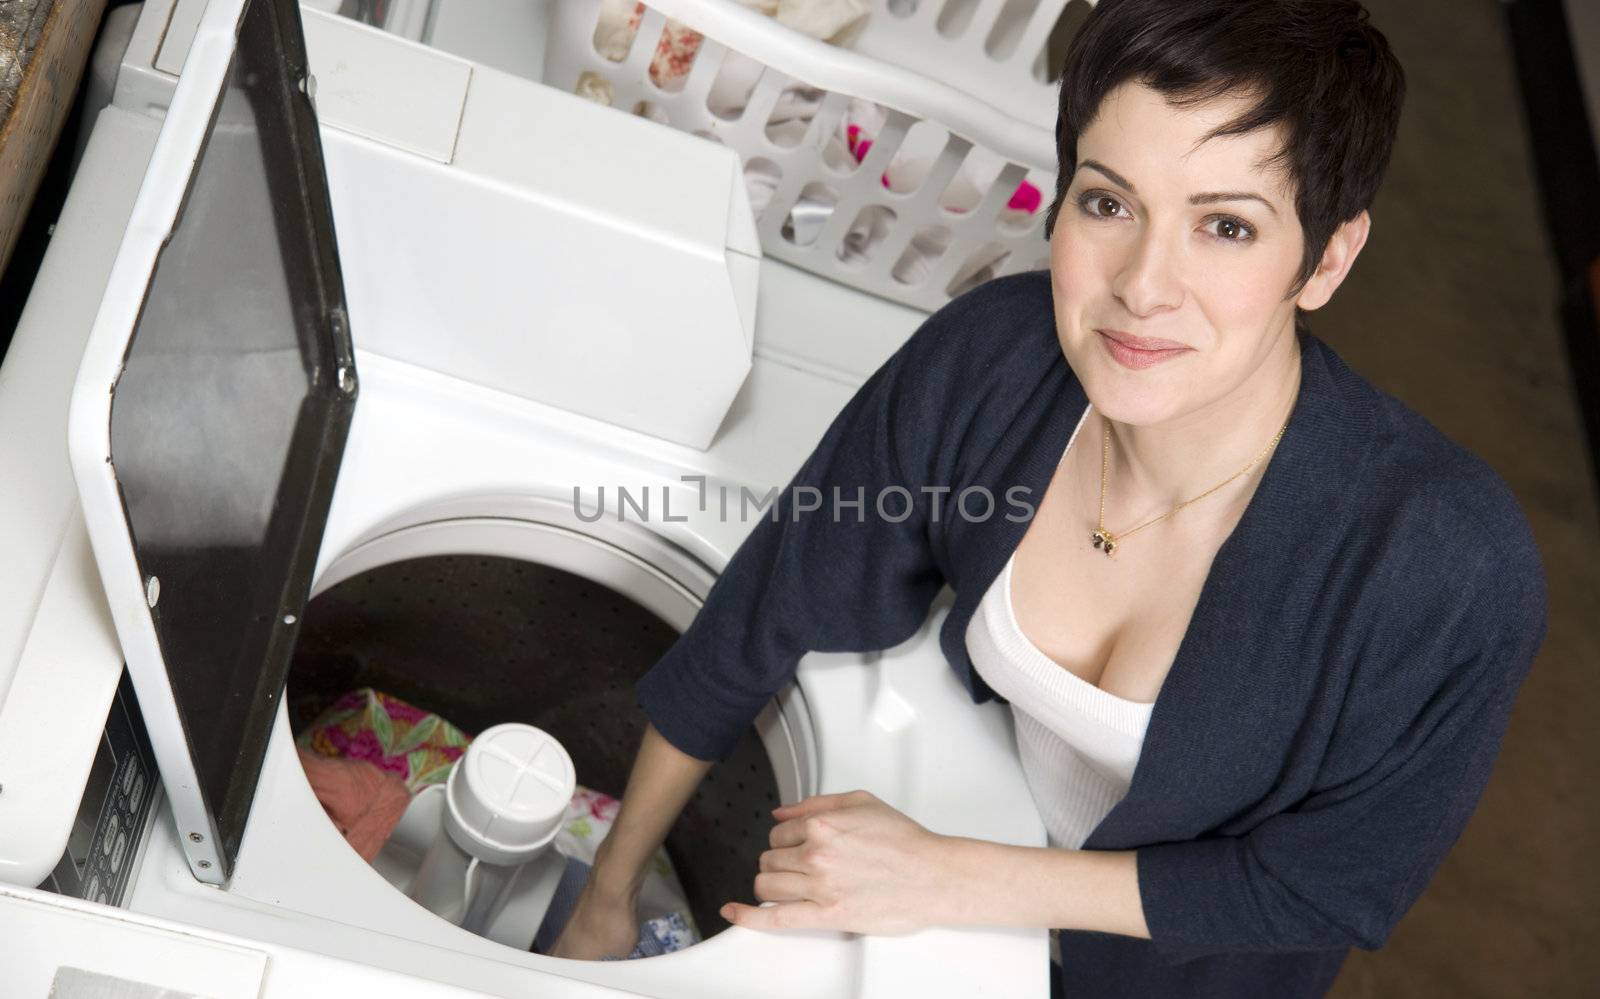 A woman pulls clothes from the washer at the laundromat